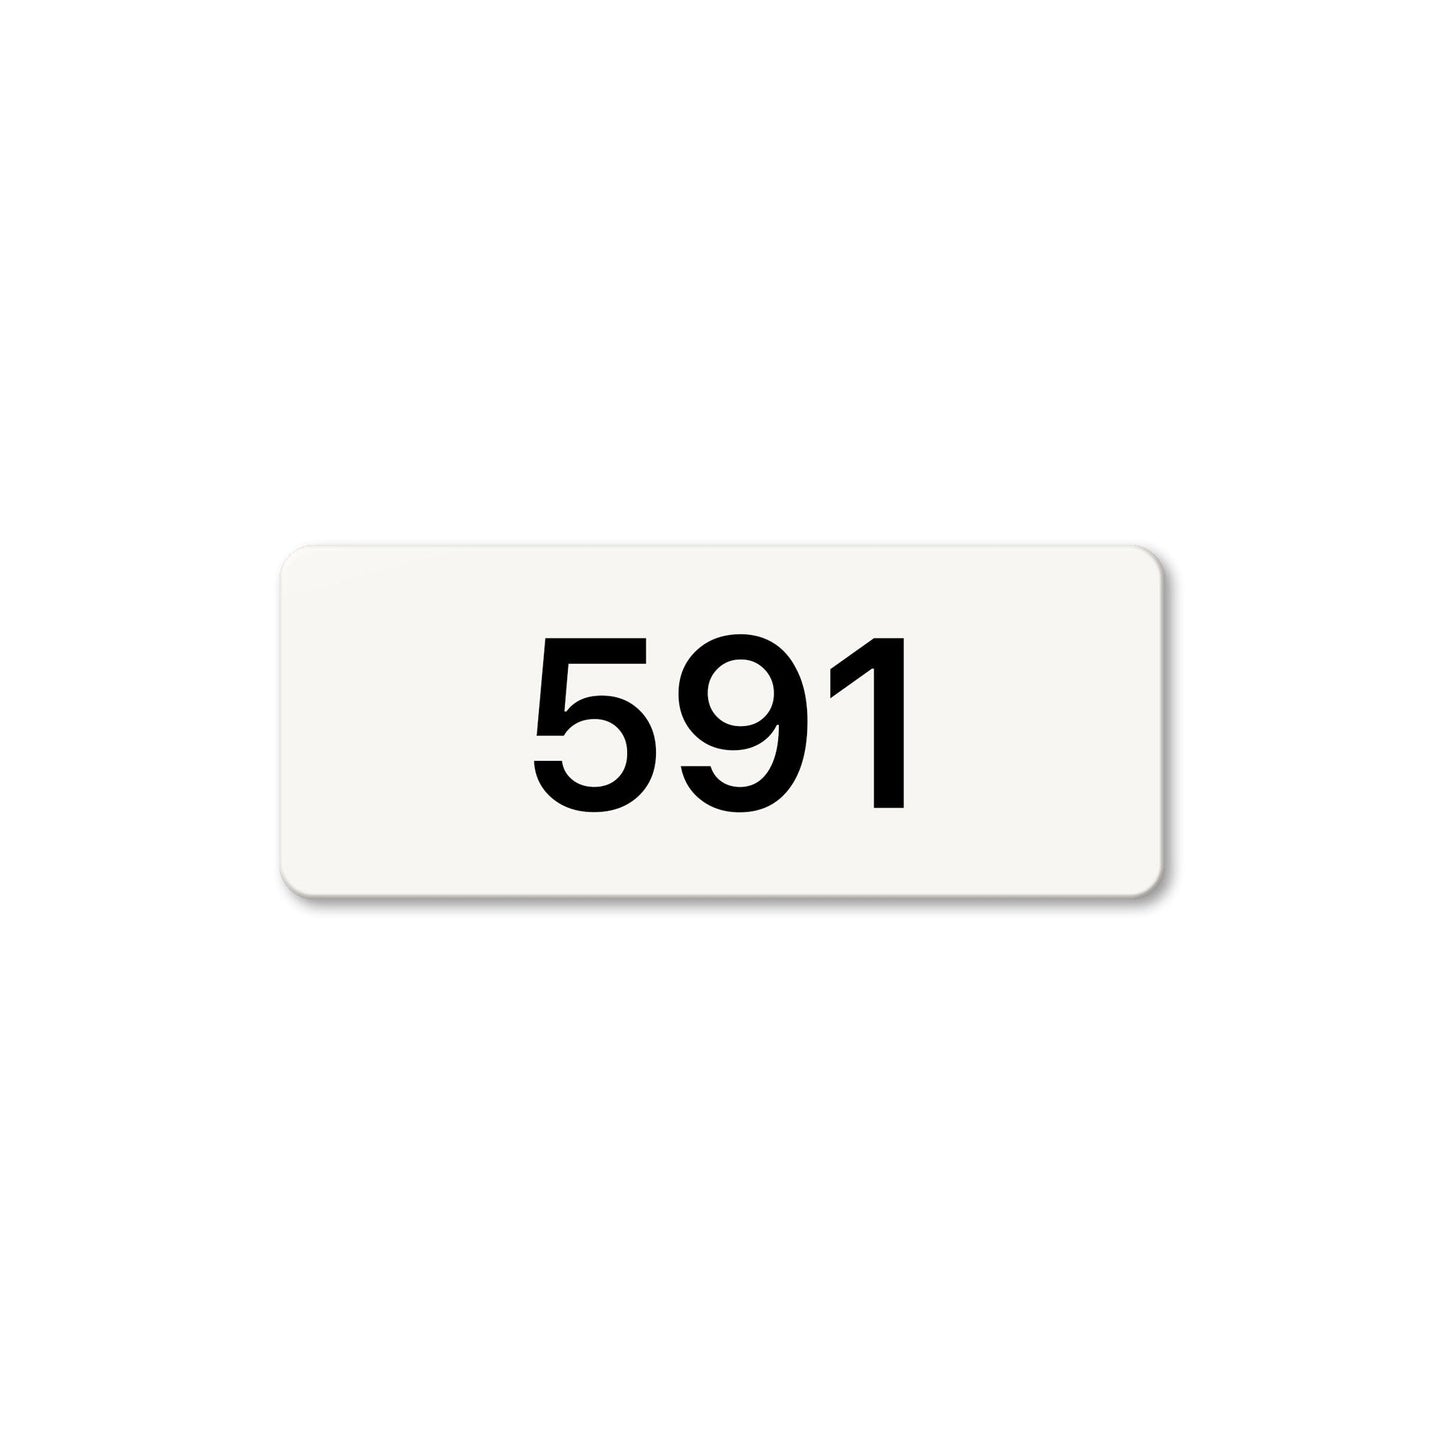 Numeral 591